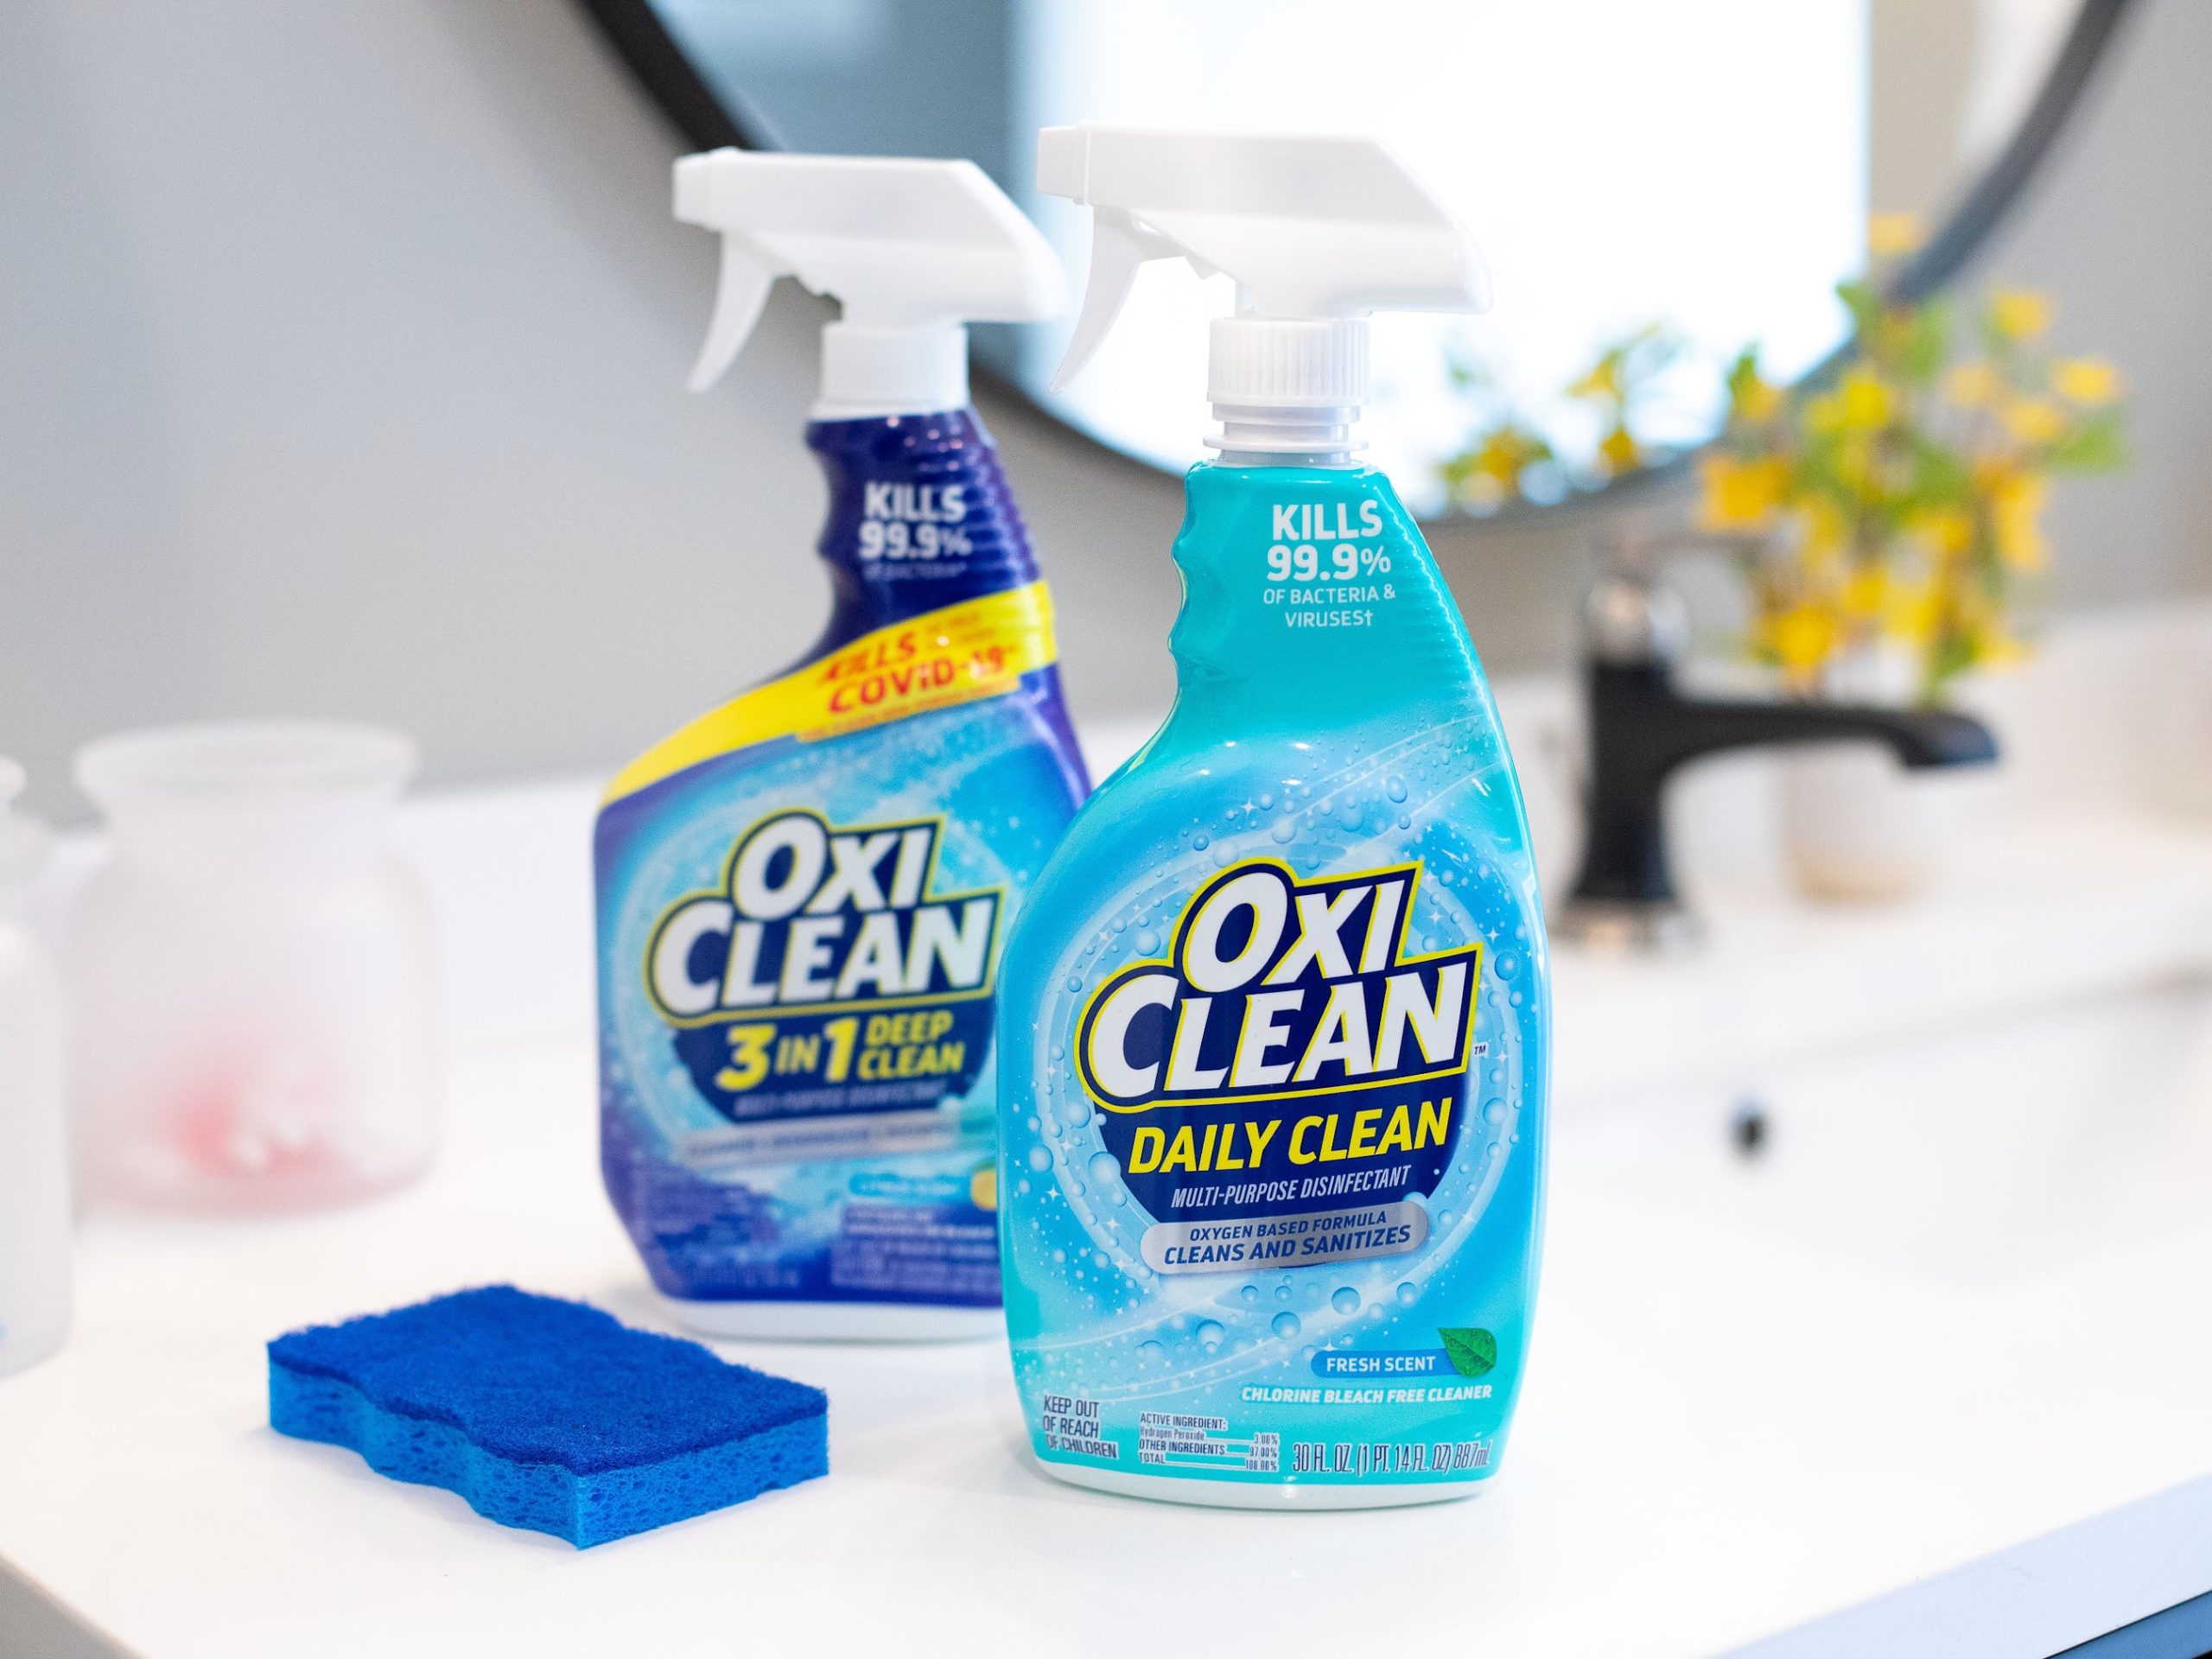 Clean & Disinfect Household Surfaces With The Power Of OxiClean™ With OxiClean™ Multi-Purpose Disinfectant Cleaners. on I Heart Publix